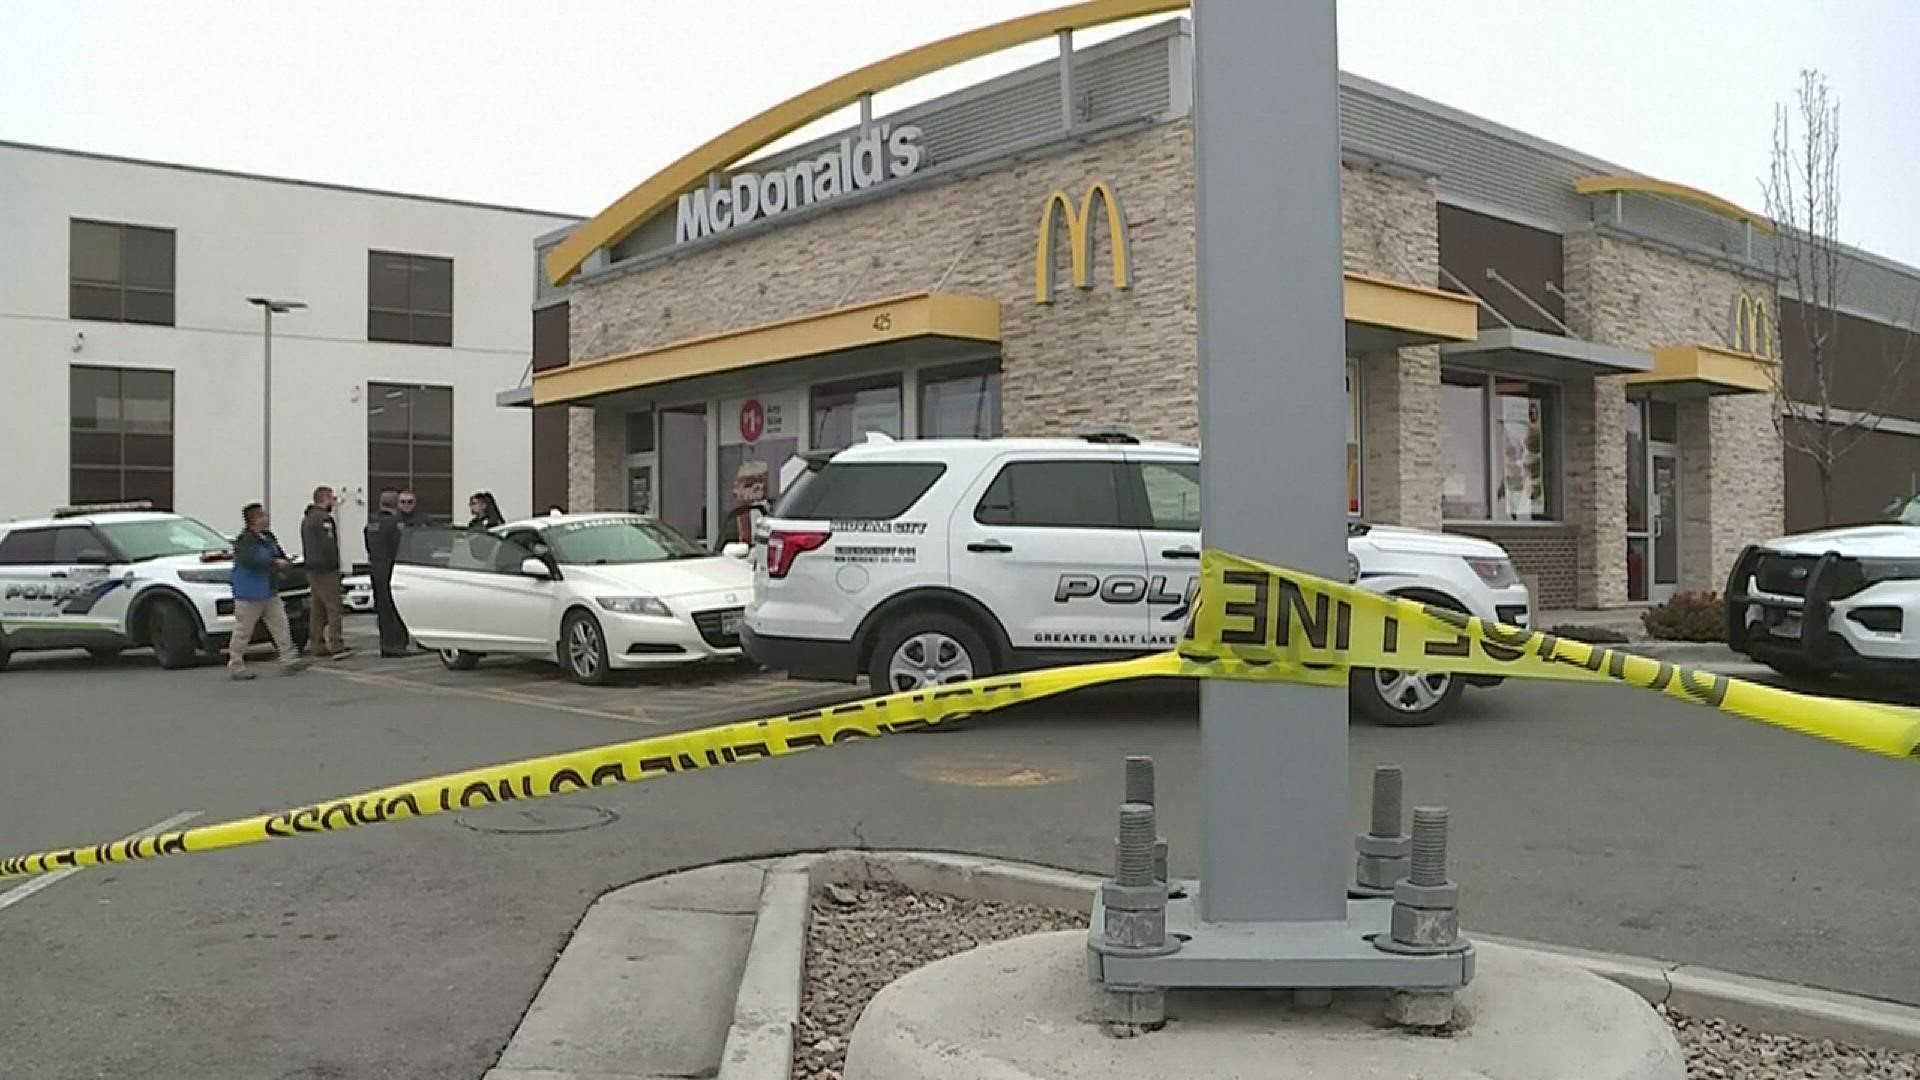 Investigators believe a man told his 4-year-old child to fire at officers following a dispute over his order at a McDonald's drive-thru in suburban Salt Lake City.